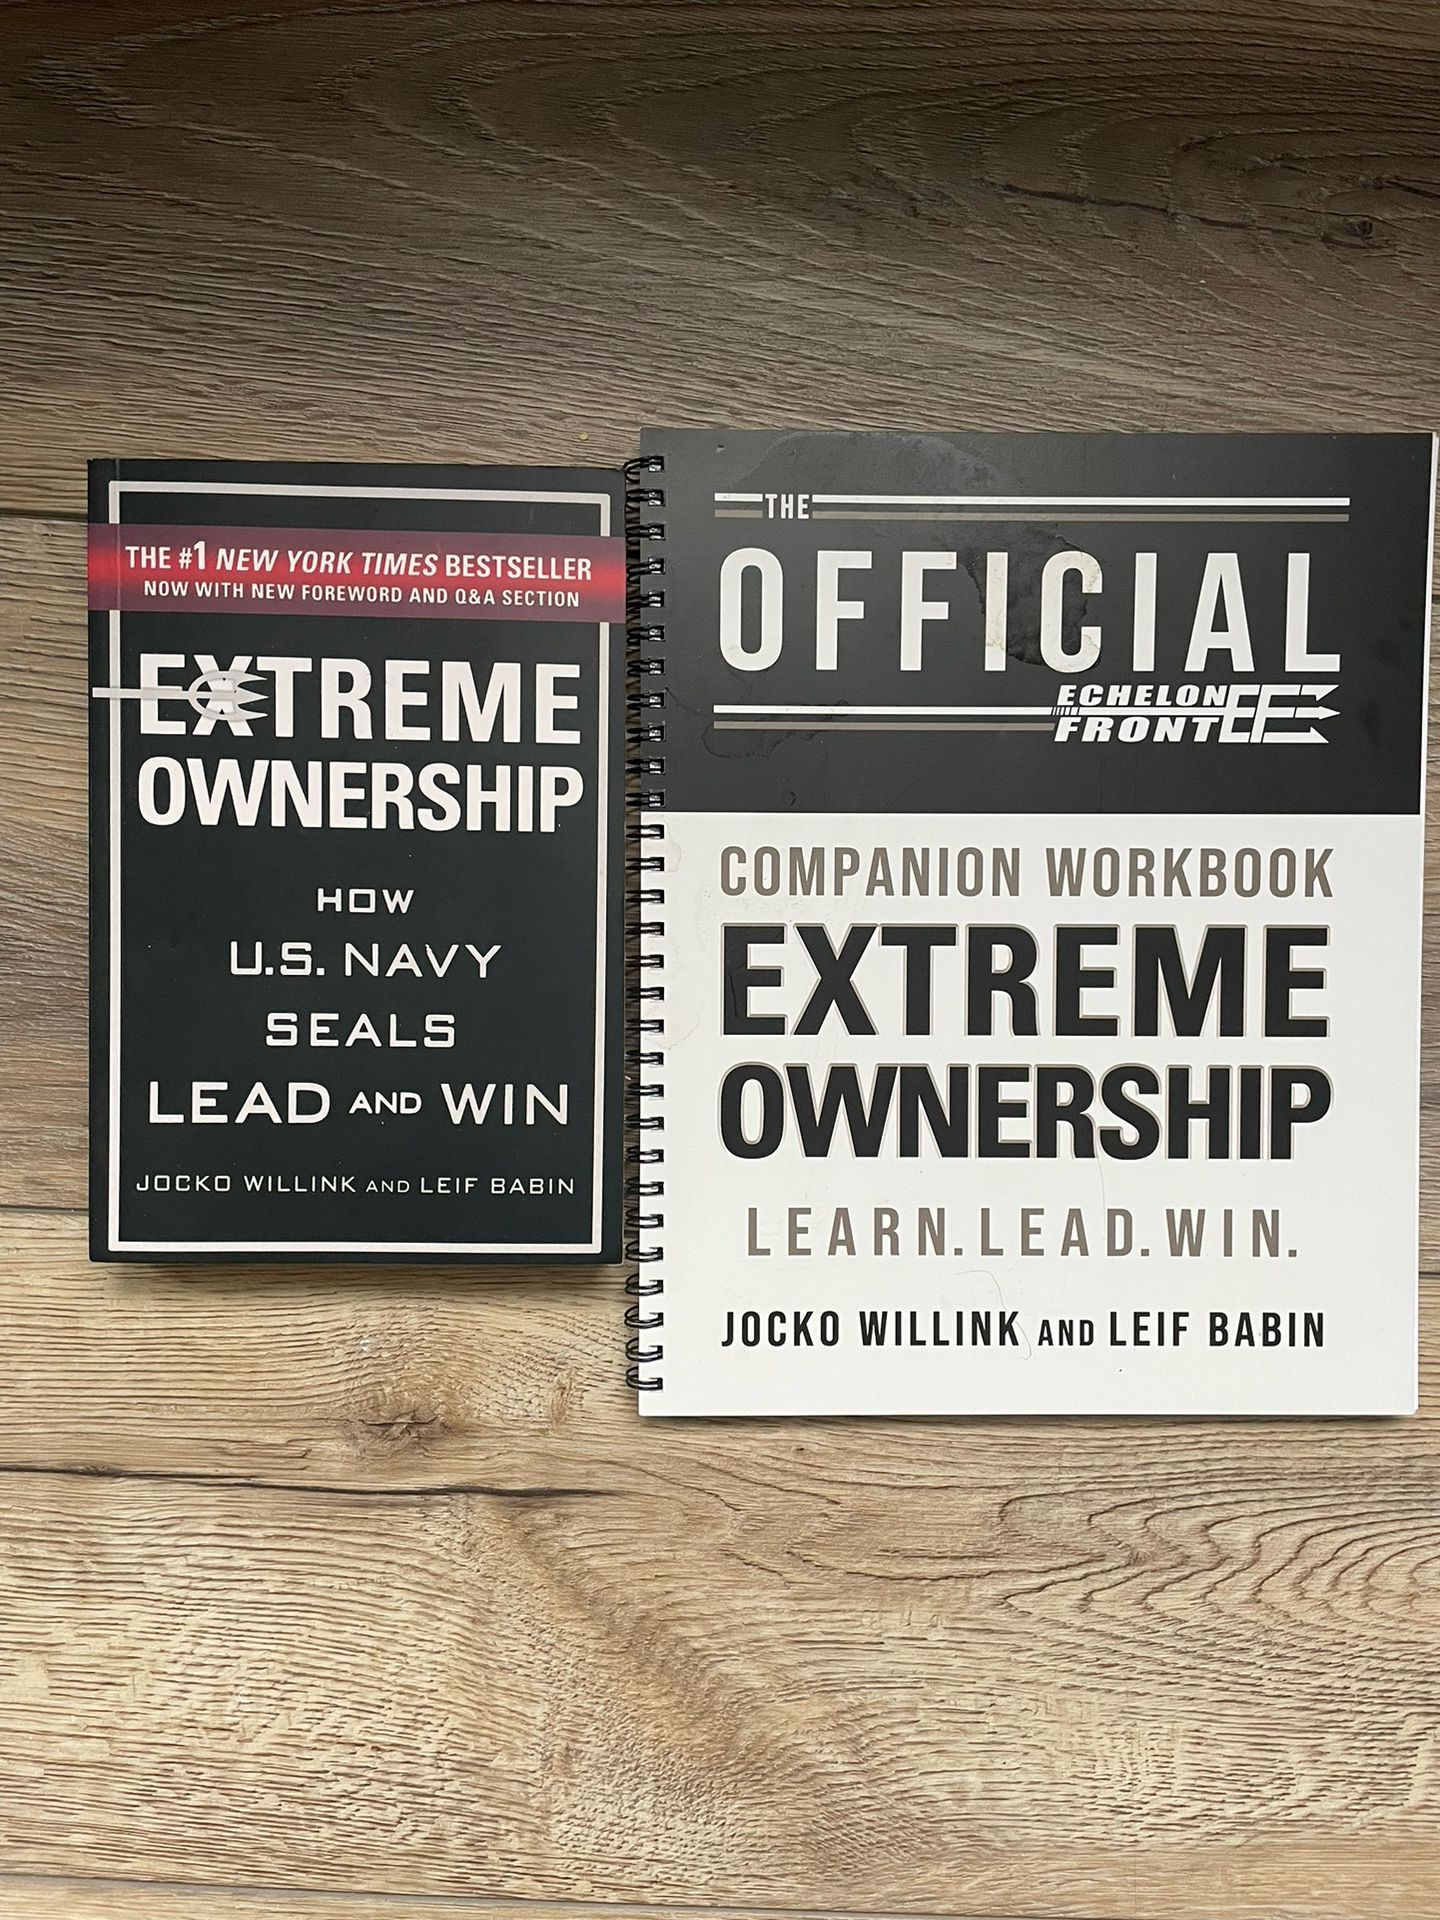 Extreme Ownership - Book And workbook